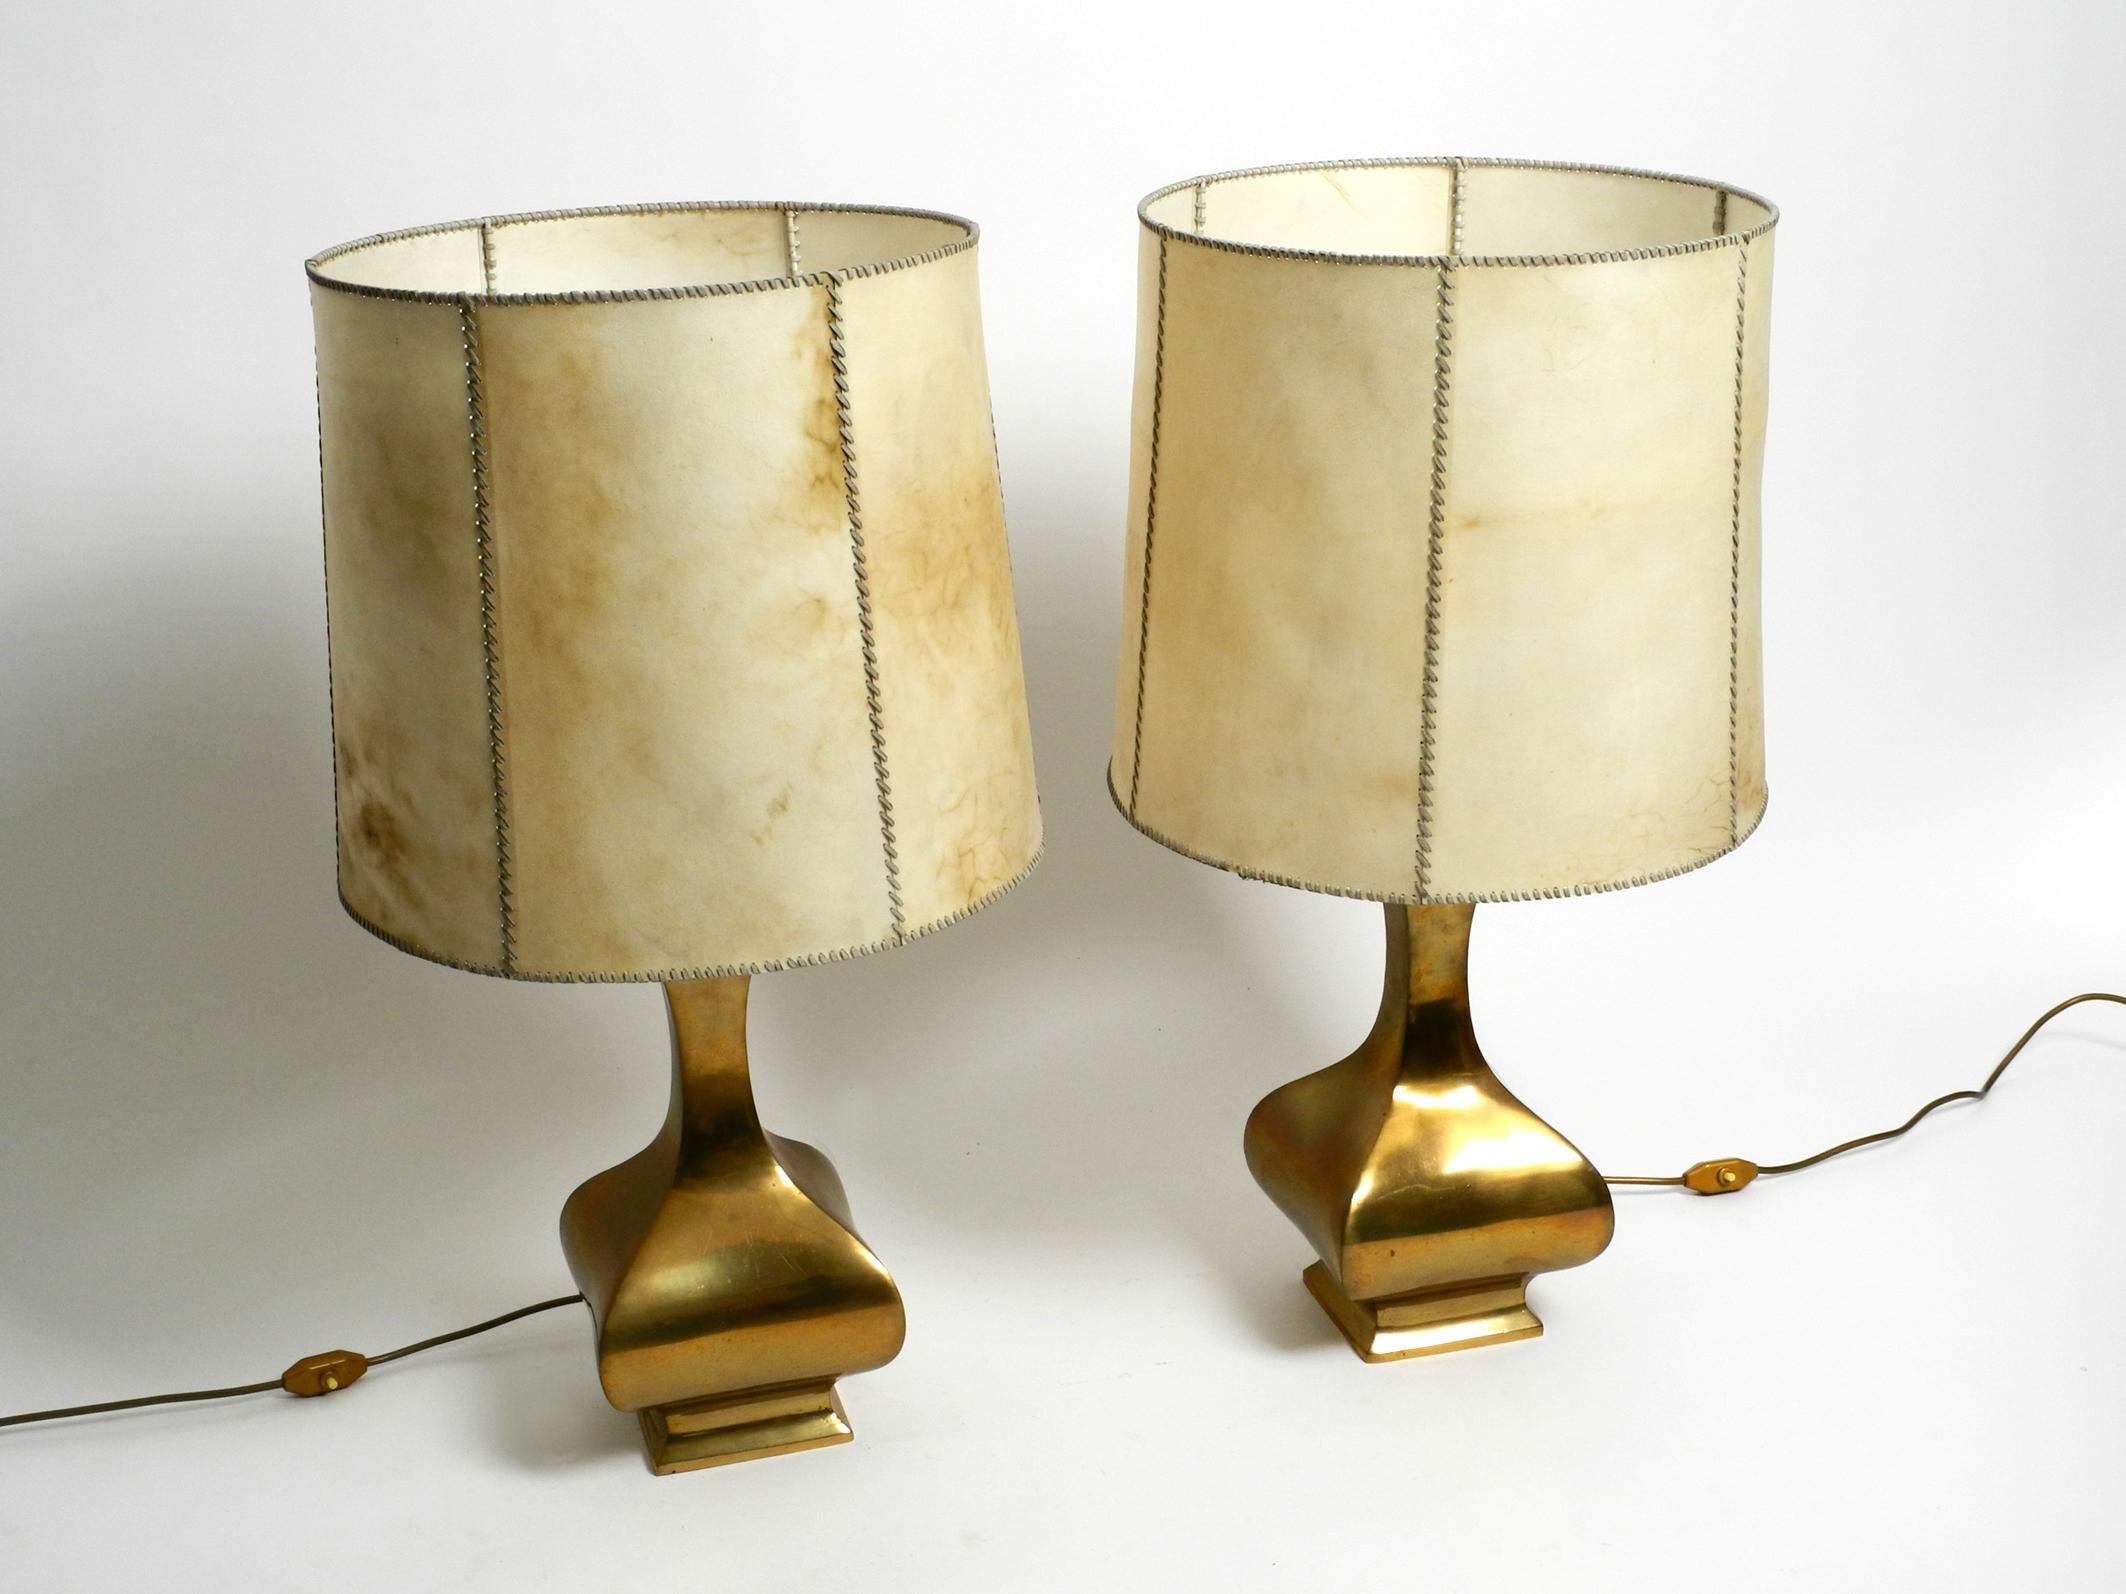 Pair of very large, exceptional 1950s Italian brass table lamps.
These lamps are so beautiful, the beauty can not be catched in the pictures.
Huge original shades made of flexible plastic in creamy white and light brown.
The plastic is braided to